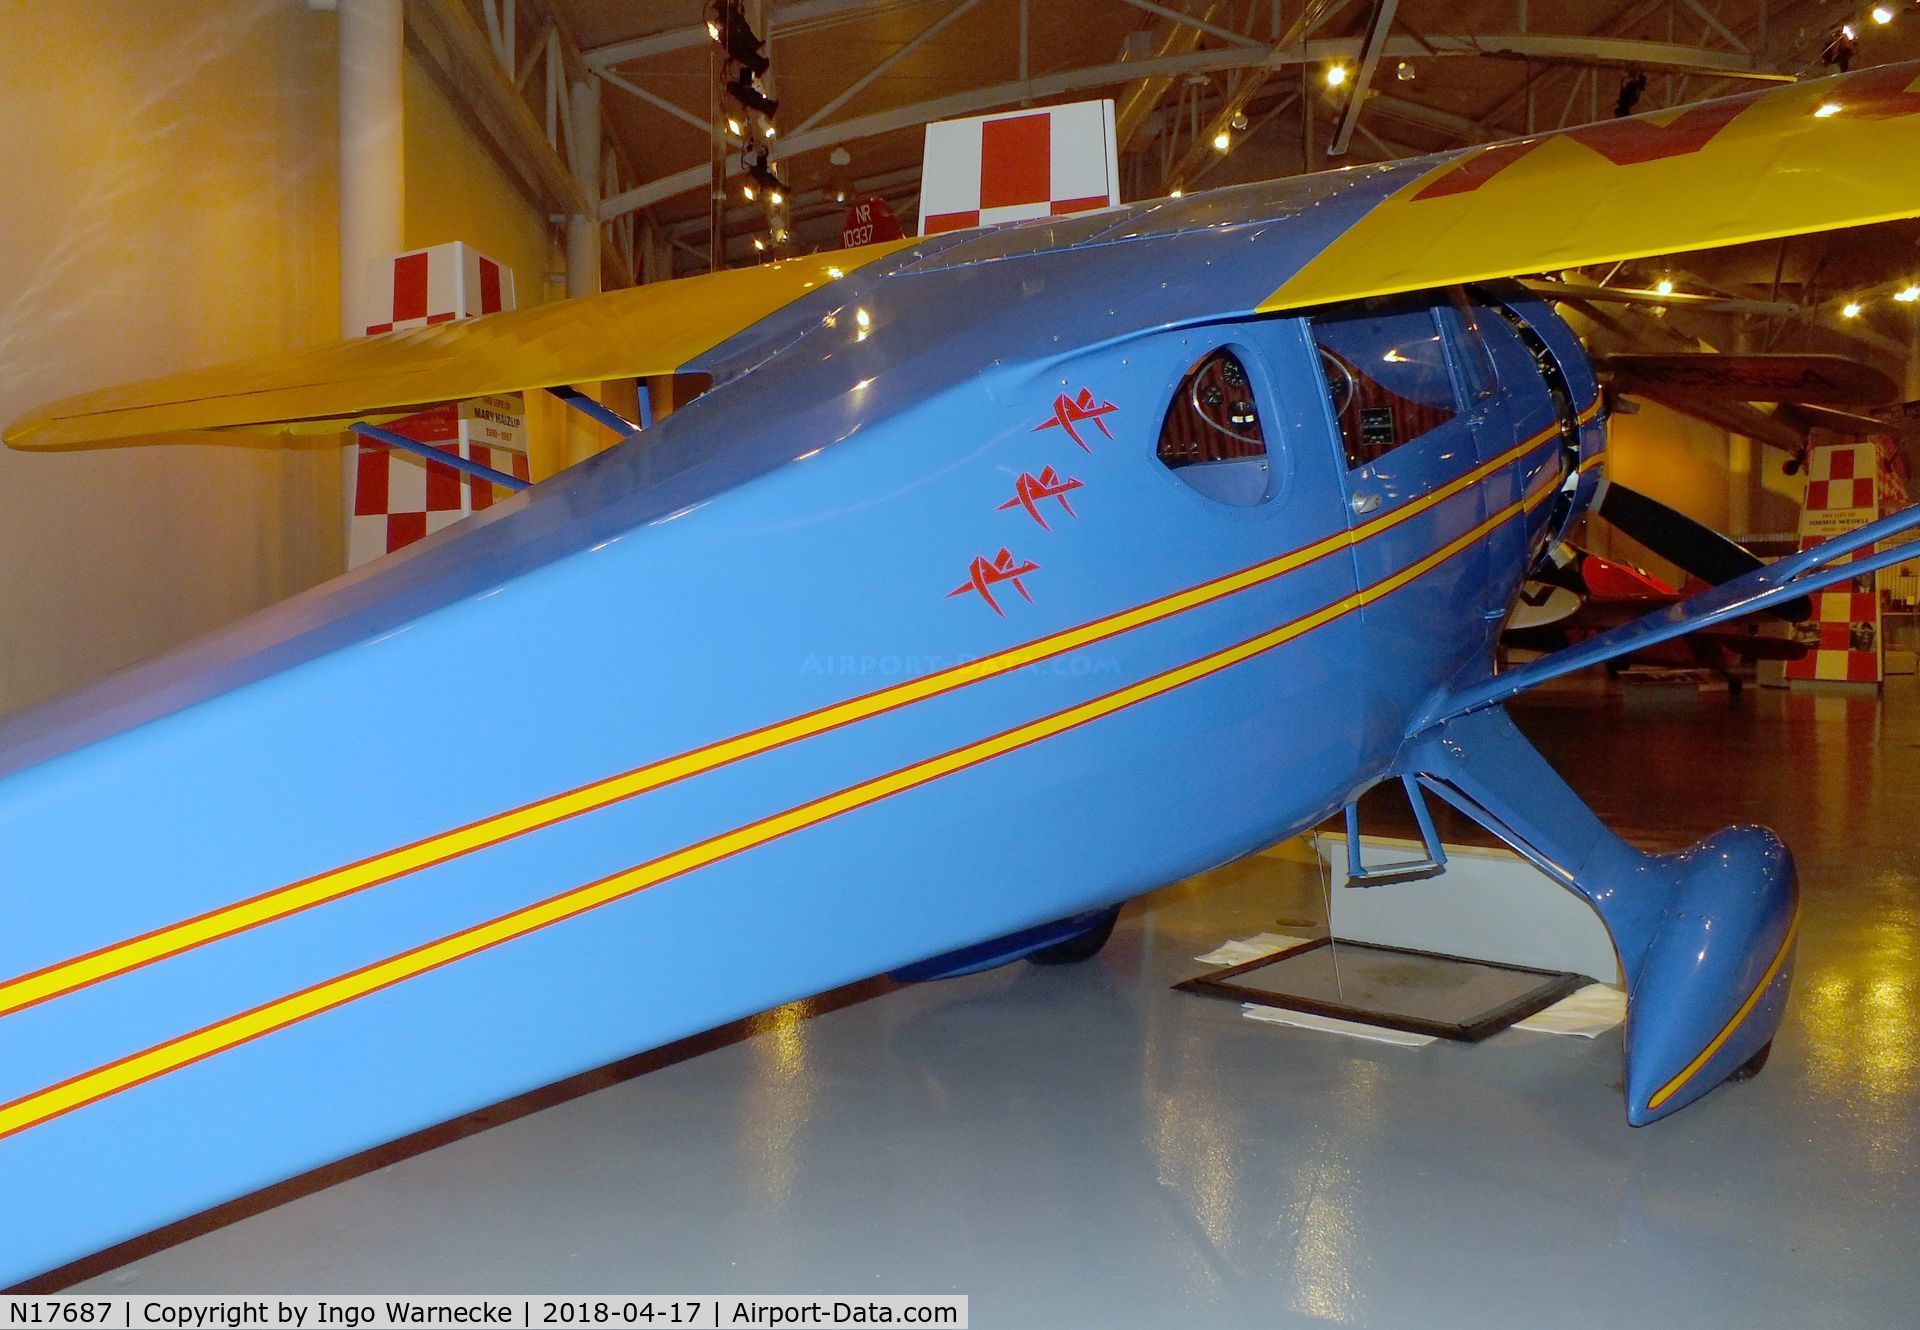 N17687, 1941 Monocoupe D145 C/N D-128, Monocoupe D-145 at the Wedell-Williams Aviation and Cypress Sawmill Museum, Patterson LA